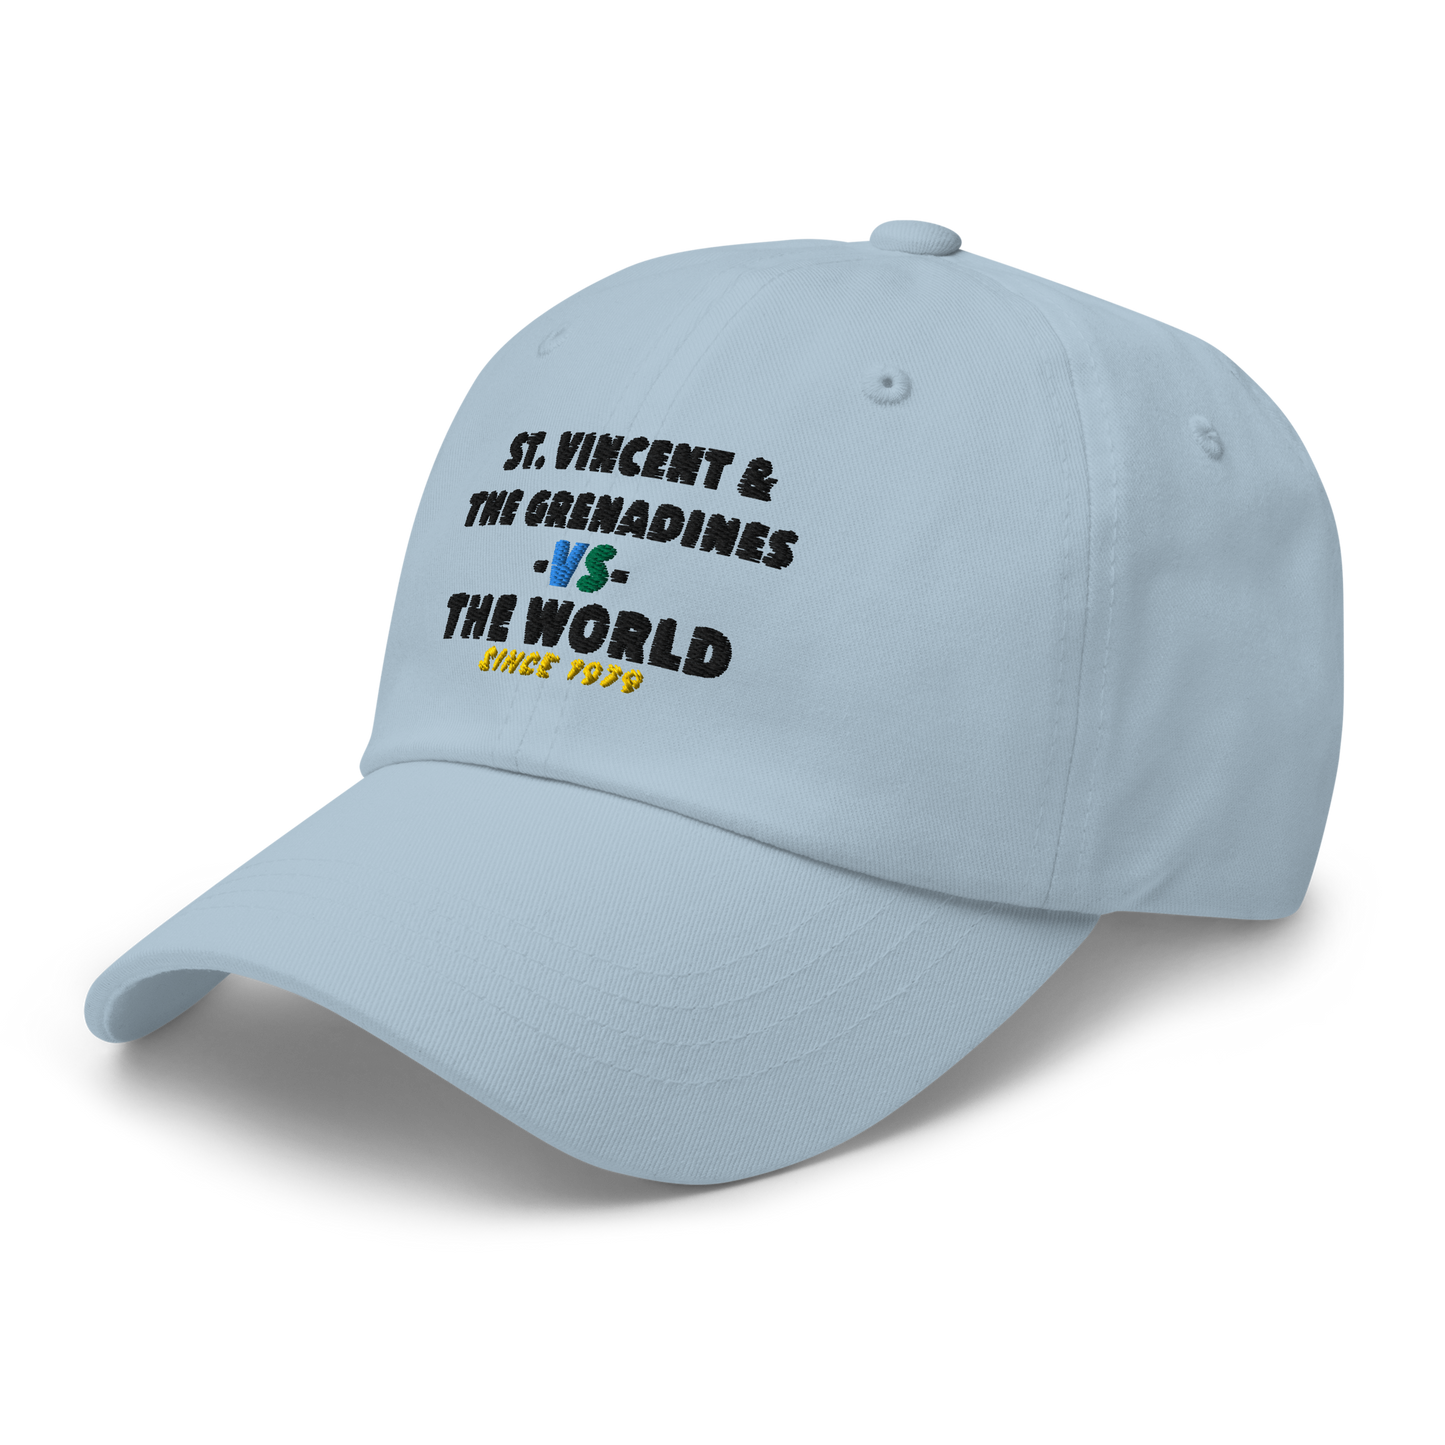 St. Vincent & The Grenadines -vs- The World Dad hat